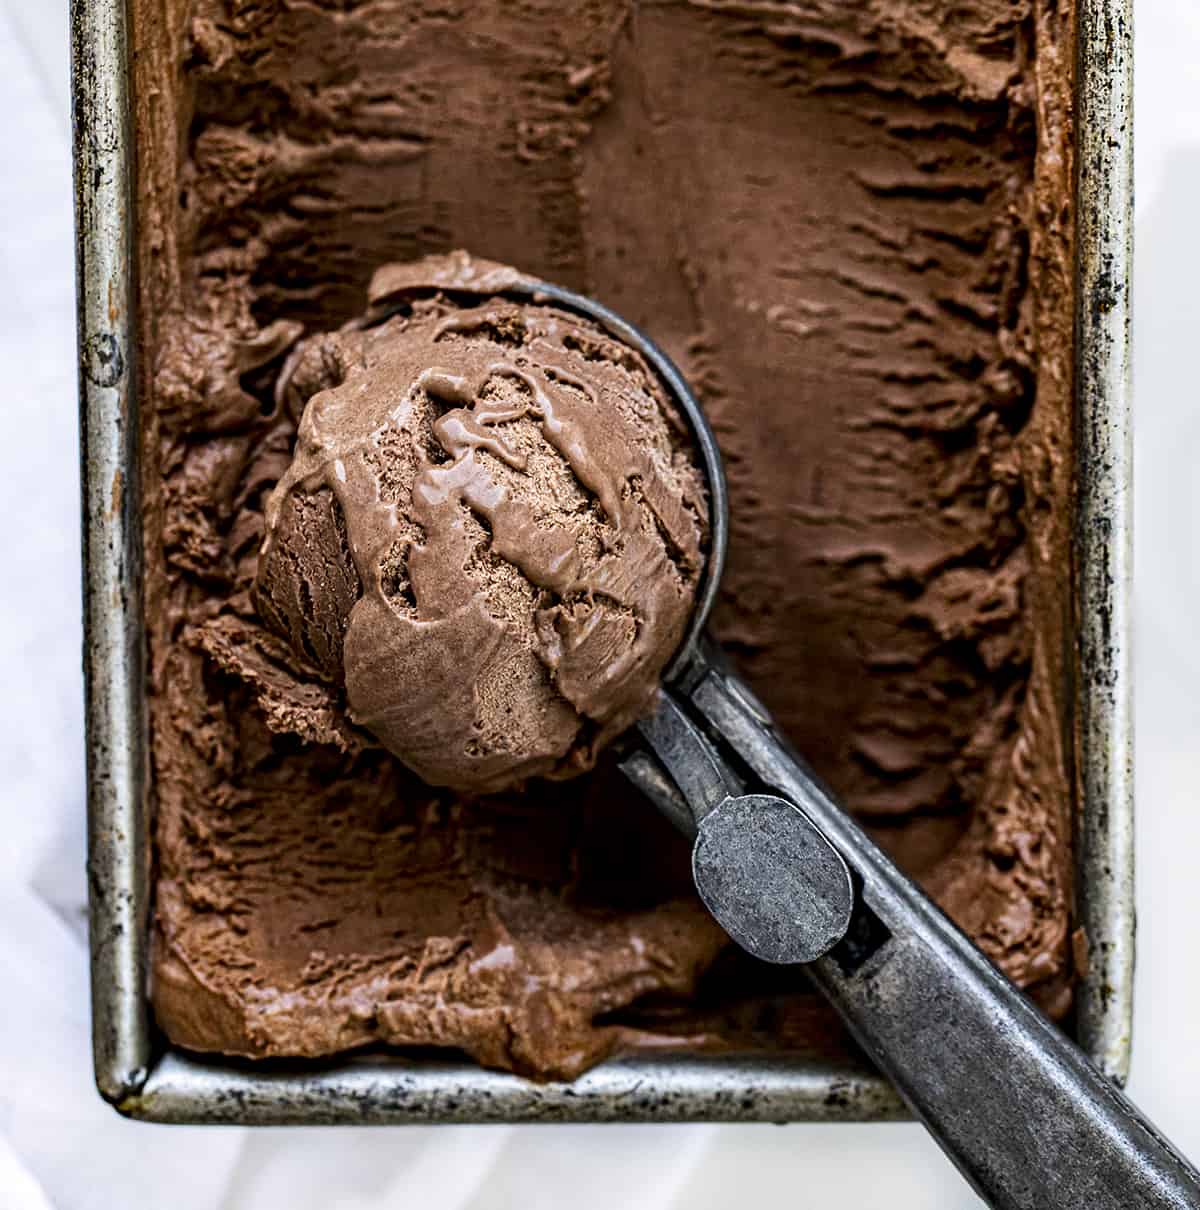 Very Close up of a Scoop of No-Churn Chocolate Ice Cream. 